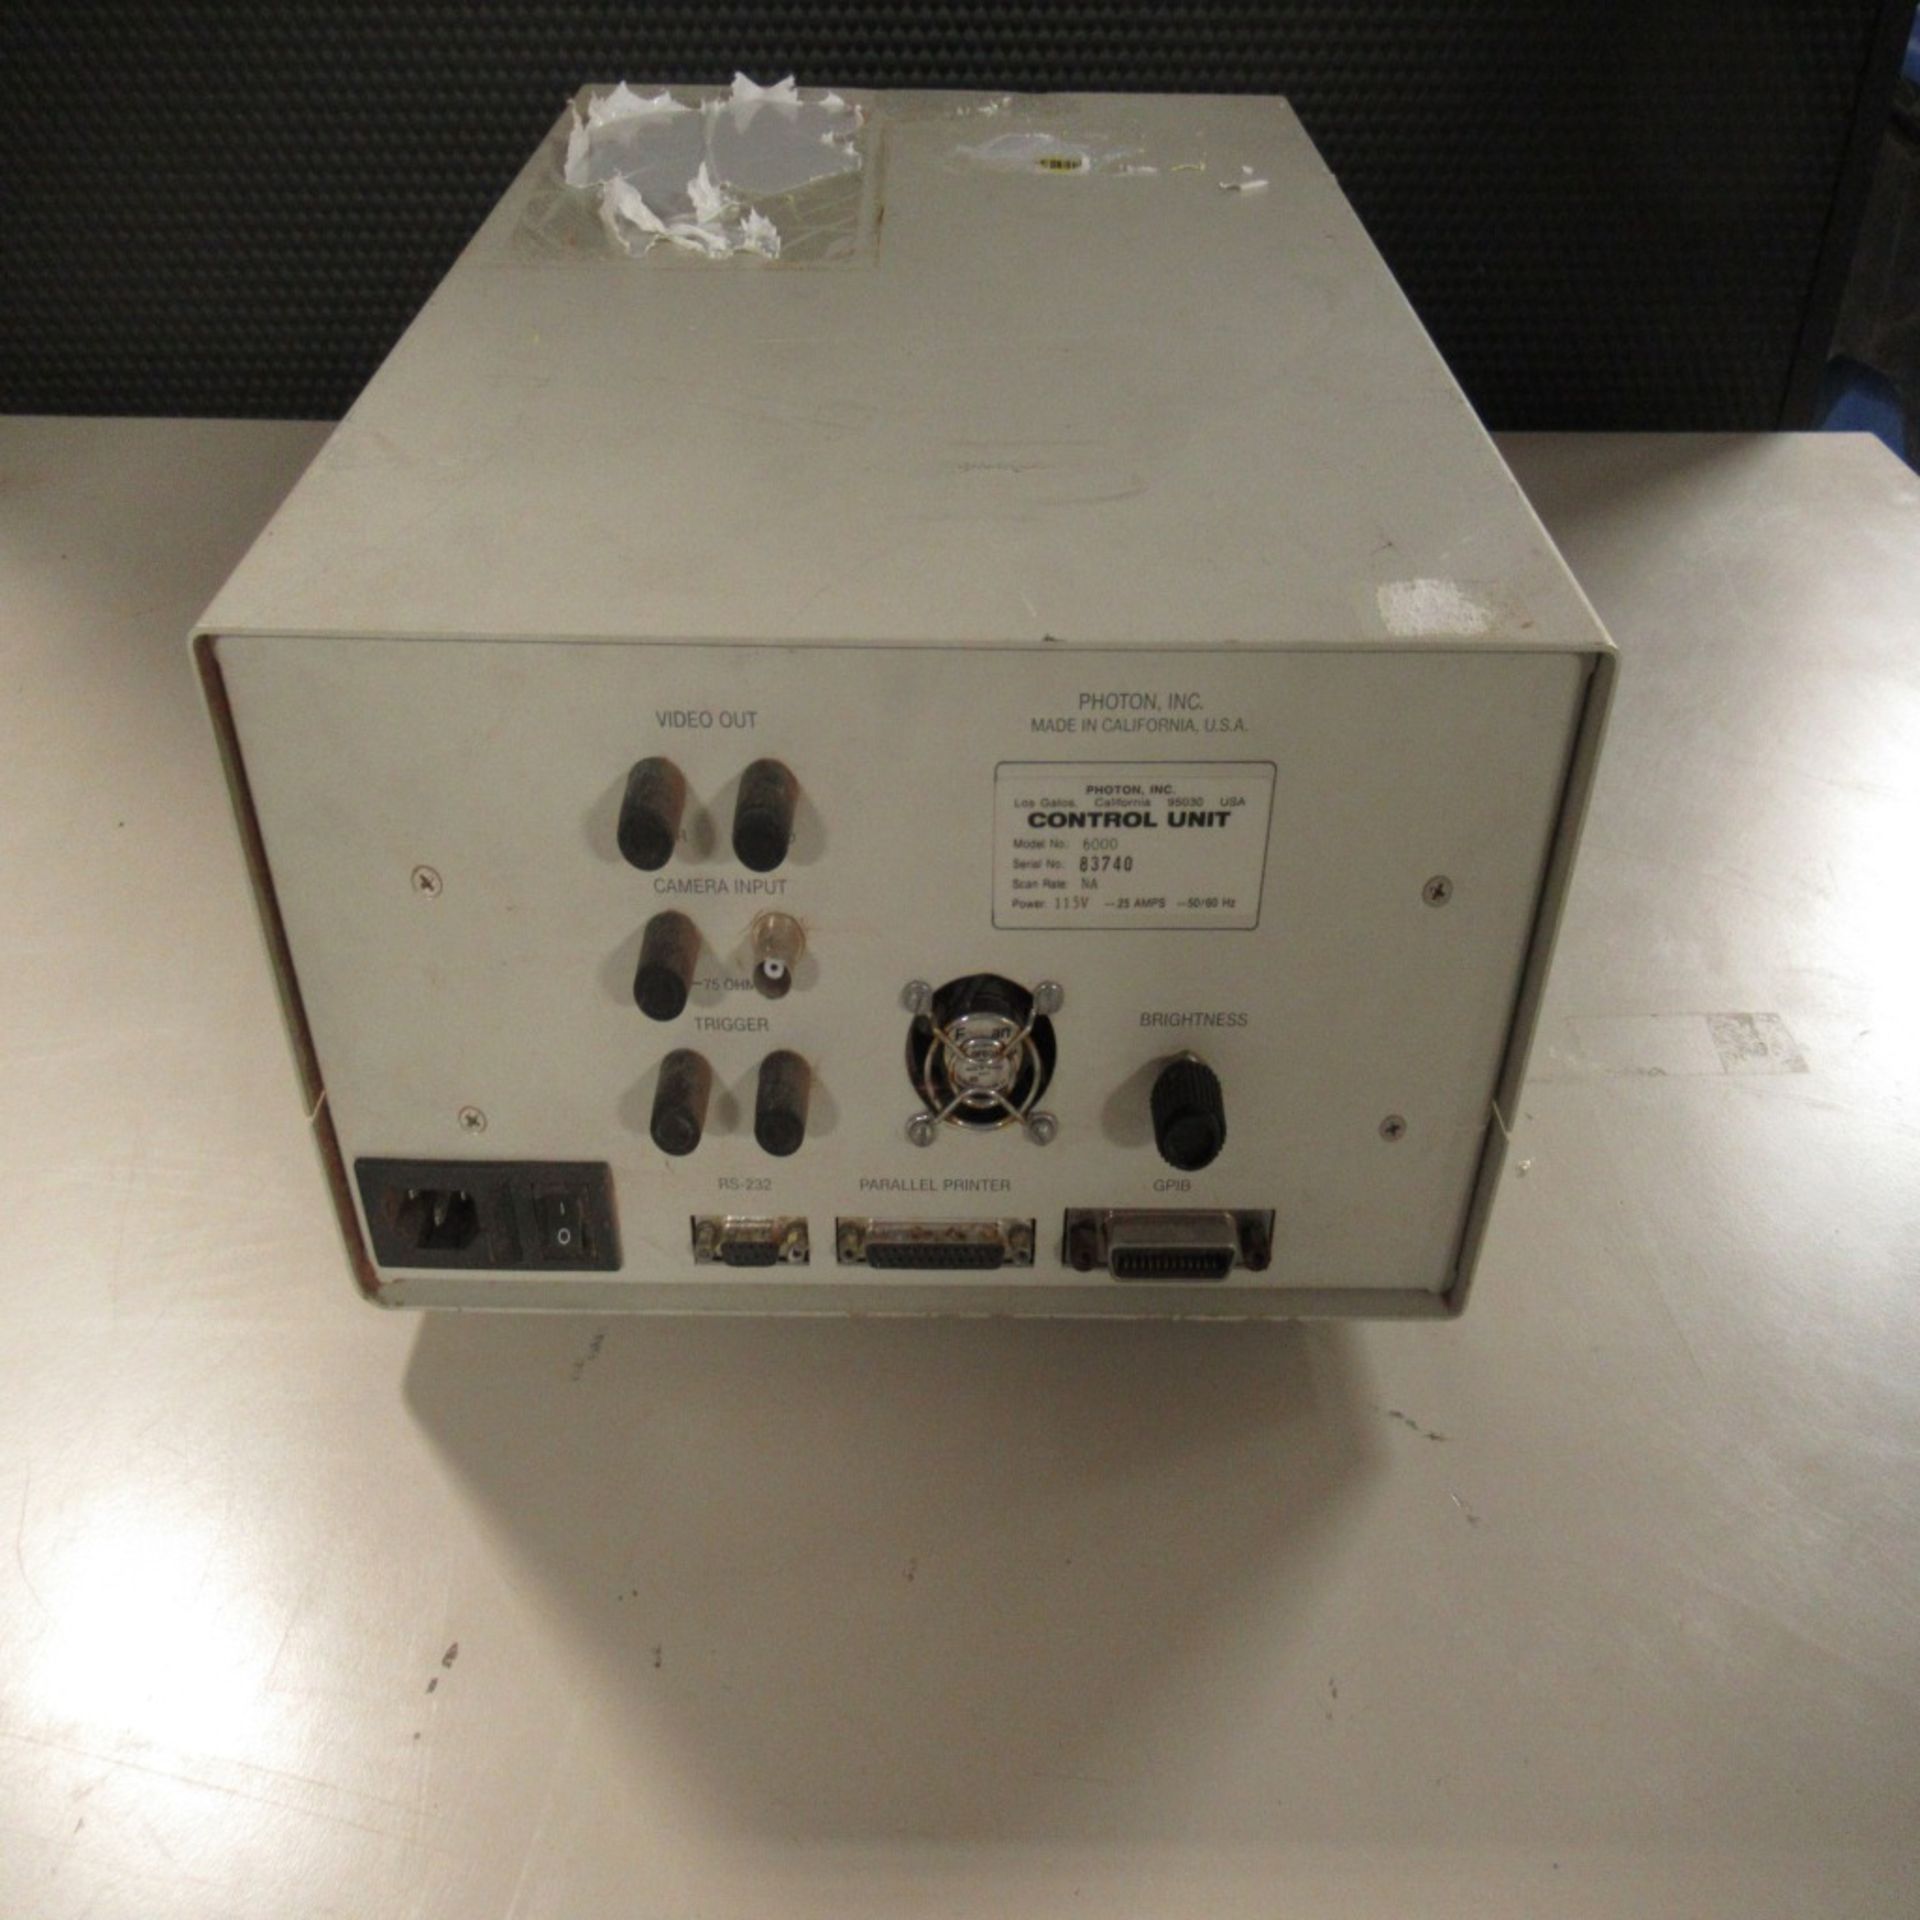 PHOTON SNAP SHOT MODEL 6000 *POWERS ON* NO SCREEN DISPLAY; FARNELL AP20-80 REGULATED POWER SUPPLY * - Image 3 of 222